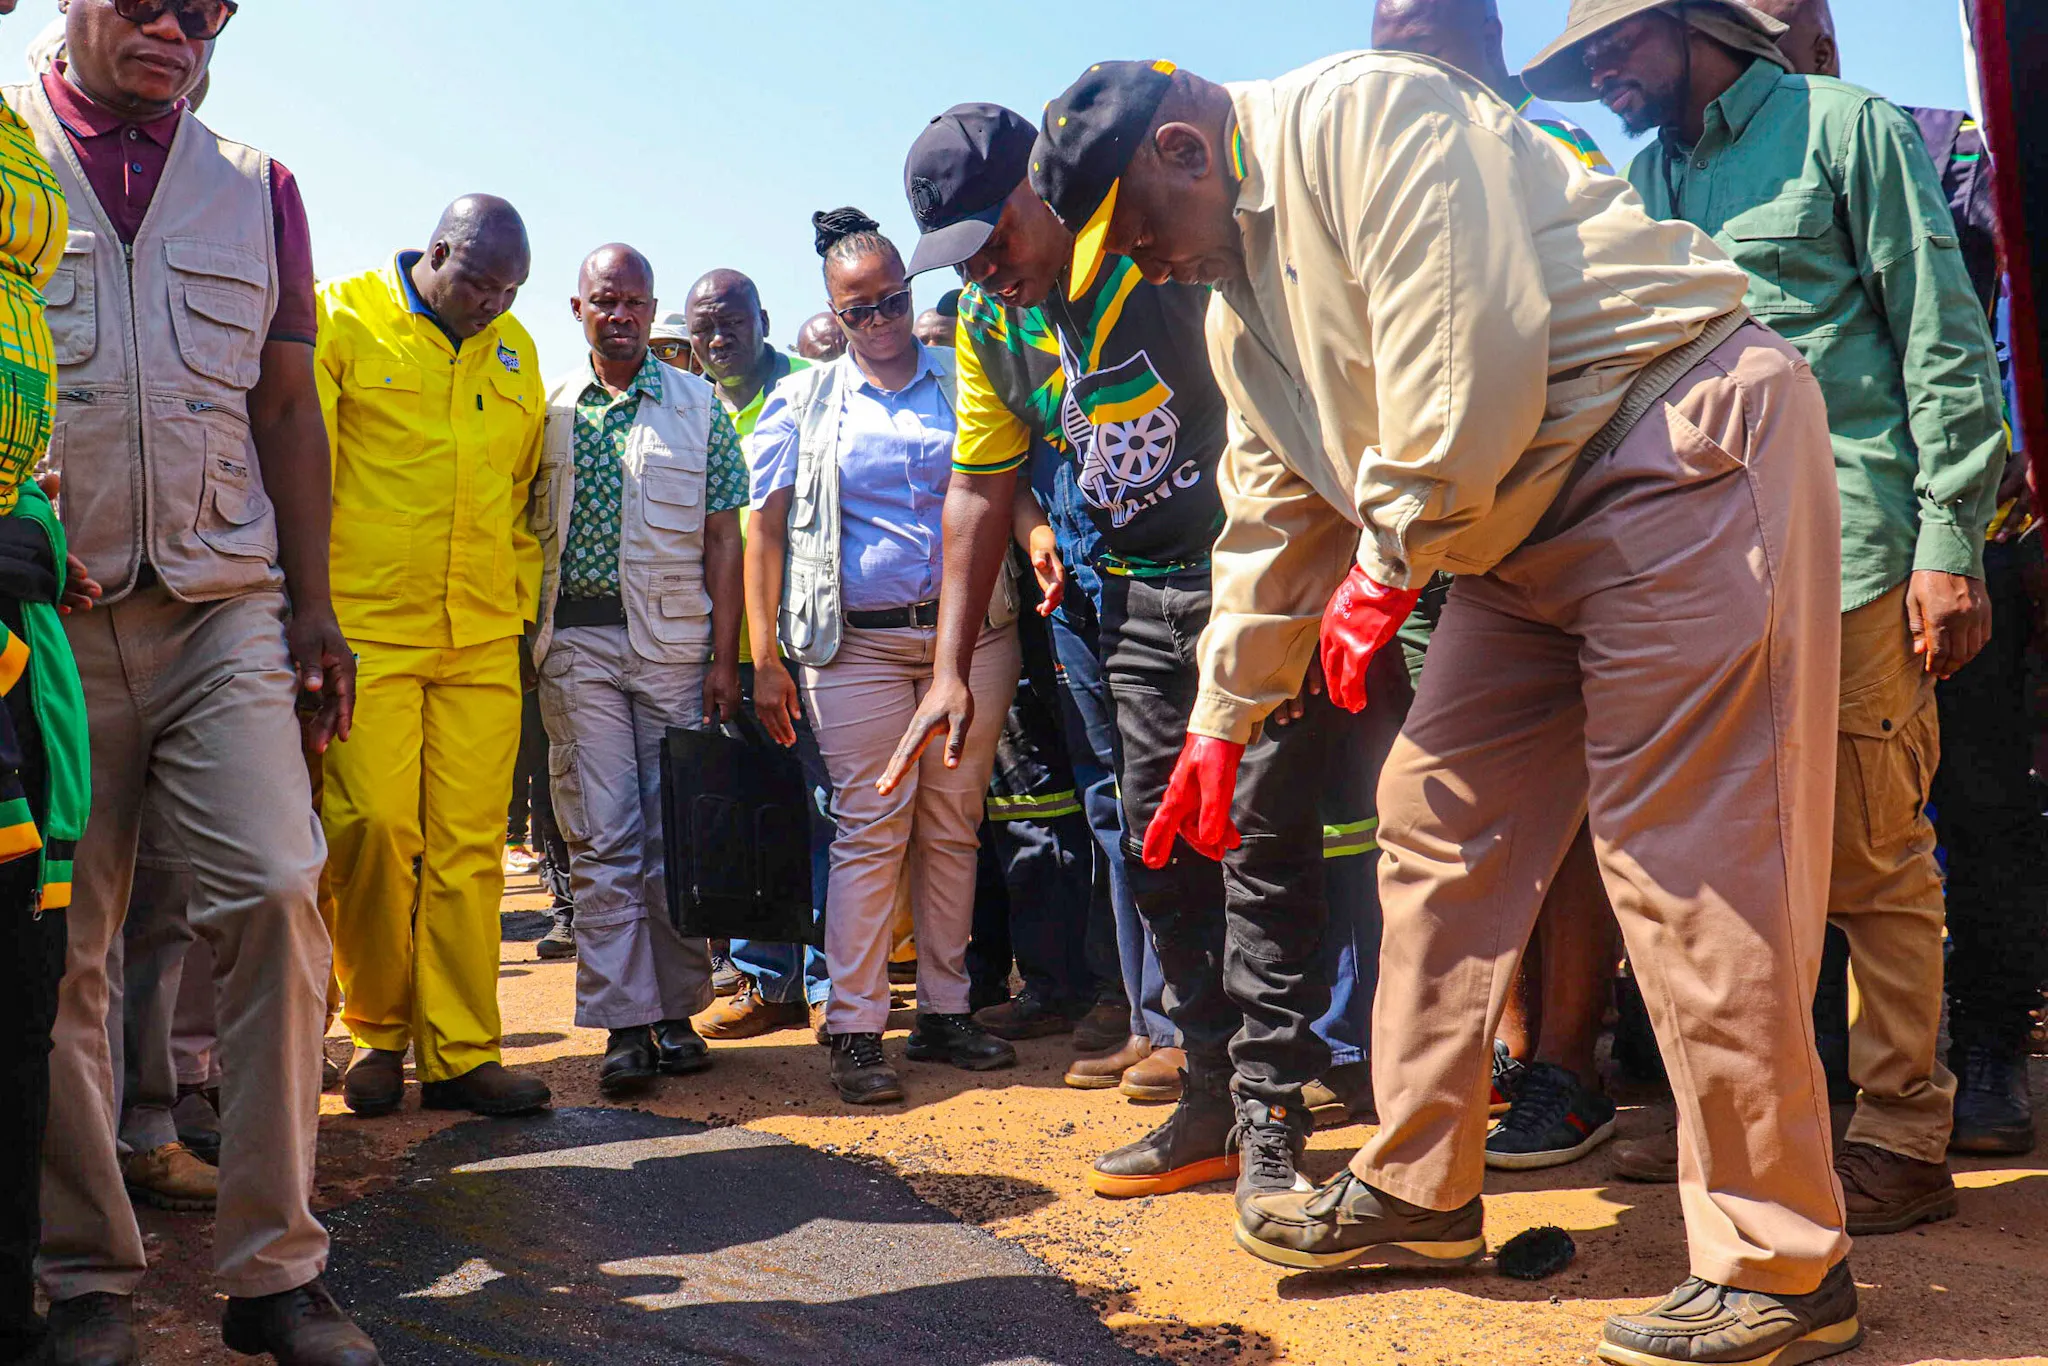 Cyril Ramaphosa inspect the one of many potholes he just fixed in Delmas Mpumalanga as part of the Letsema campaign. 